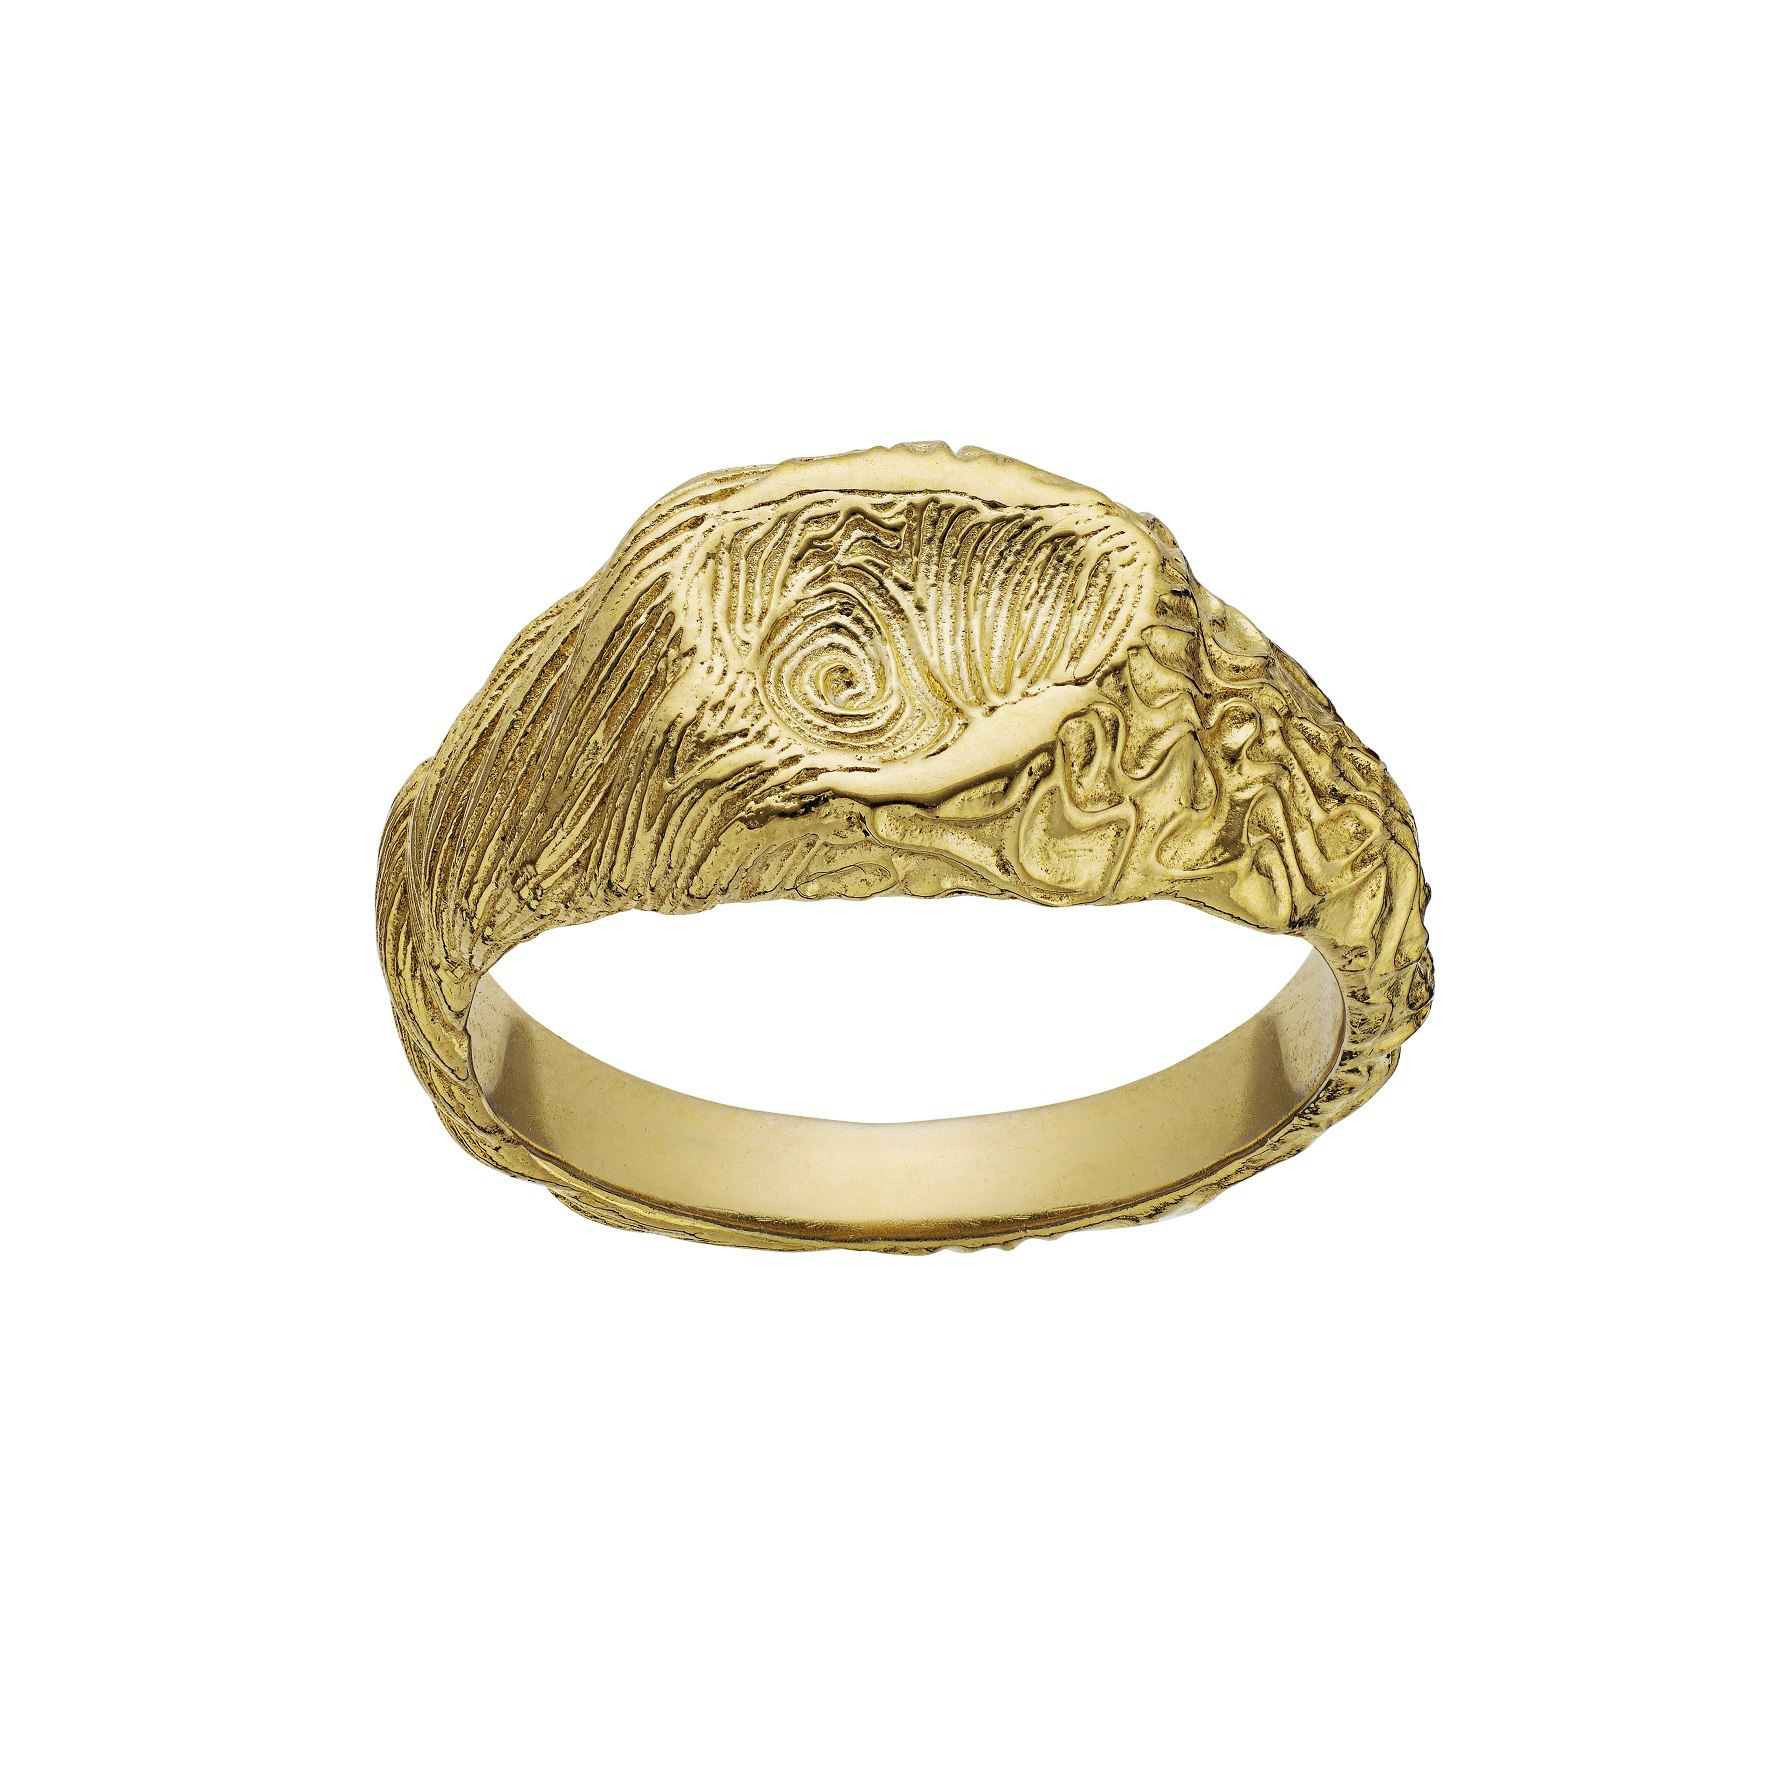 Gigi Ring from Maanesten in Goldplated-Silver Sterling 925